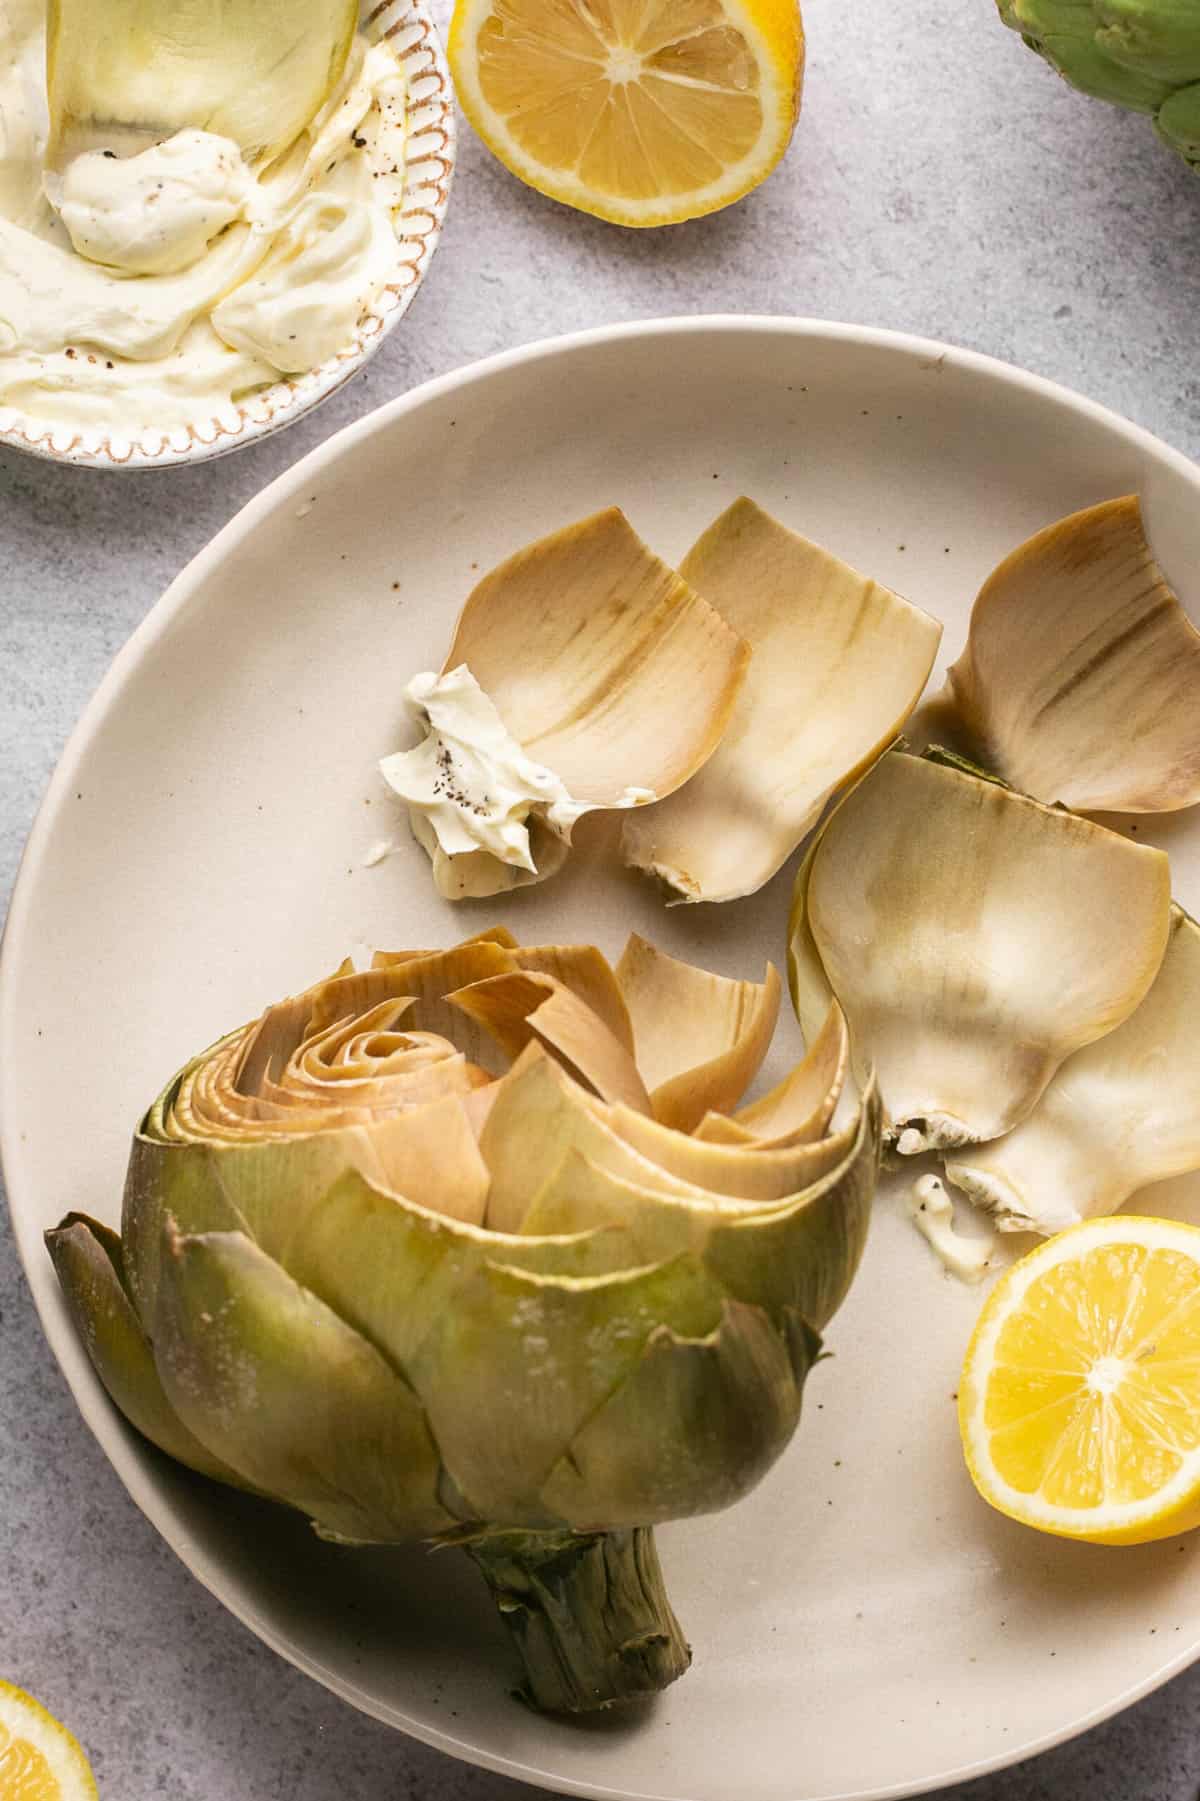 cooked artichoke on a plate with lemon half